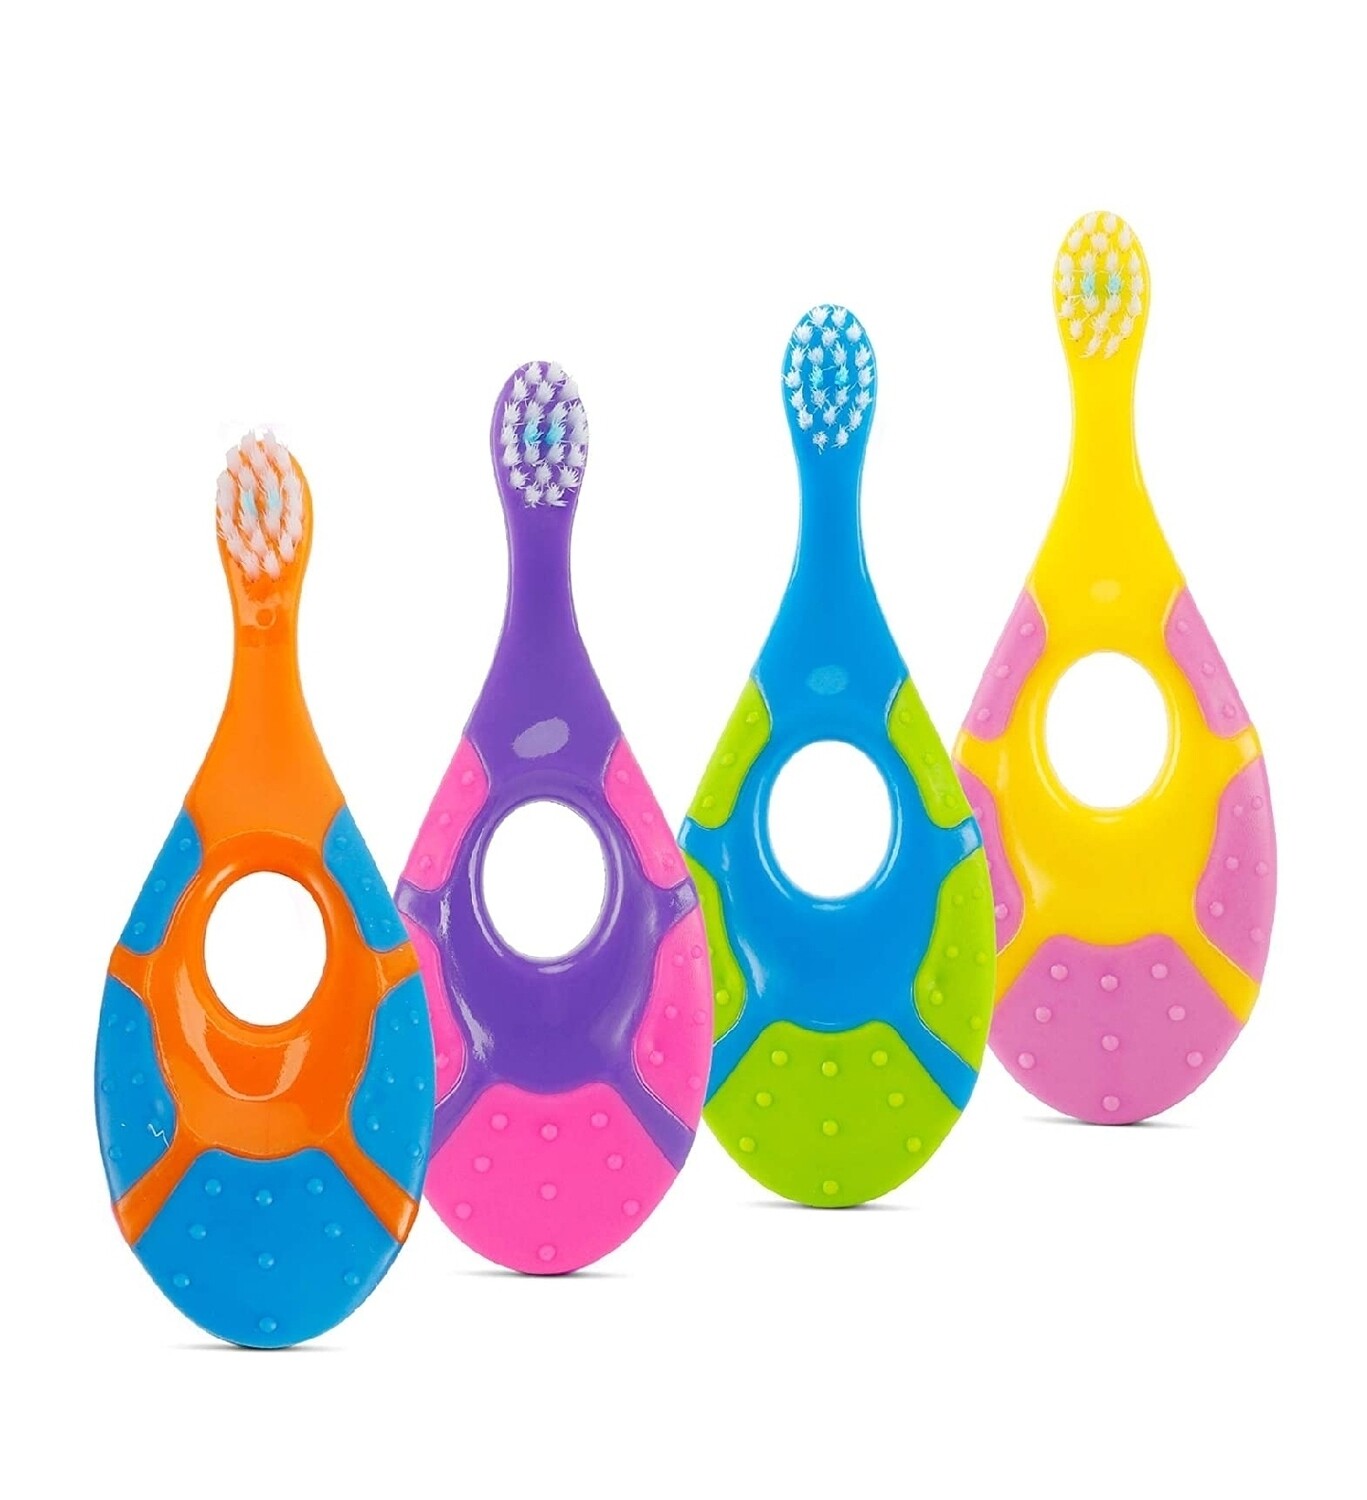 Slotic Baby Toothbrush (1 pc)